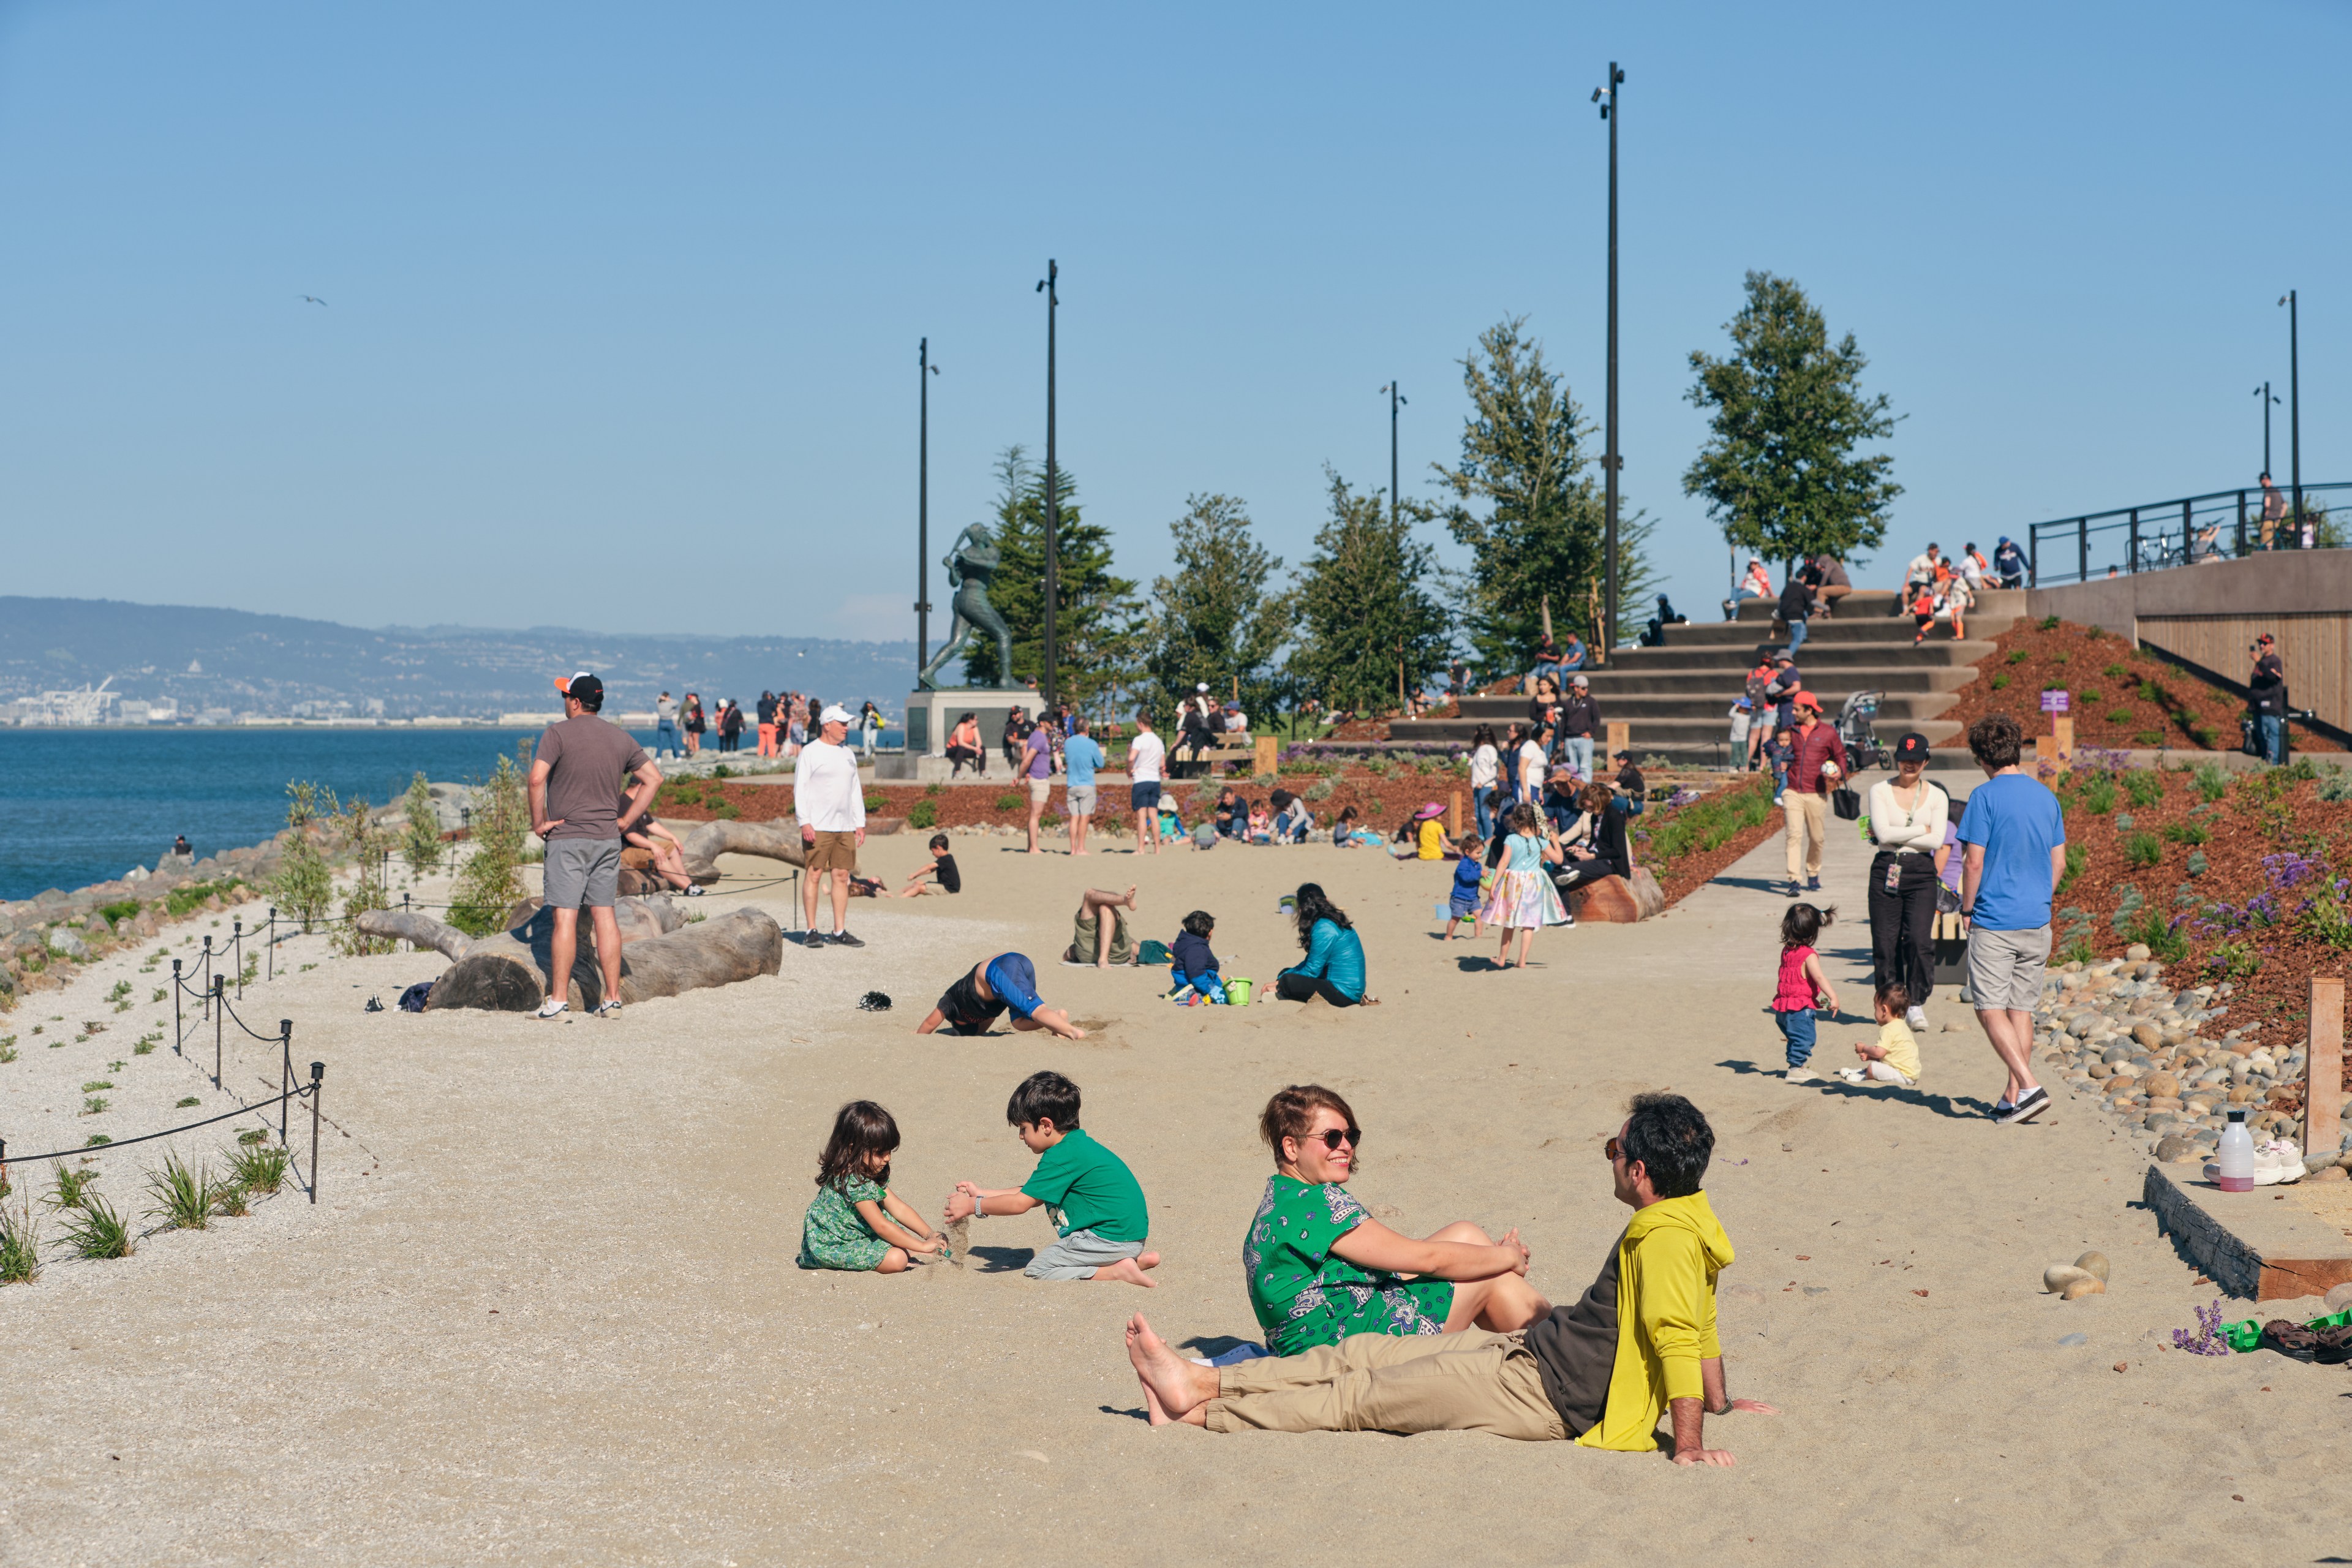 People enjoying a sunny day at a beachside park with steps, a sandy area, and a clear sky.